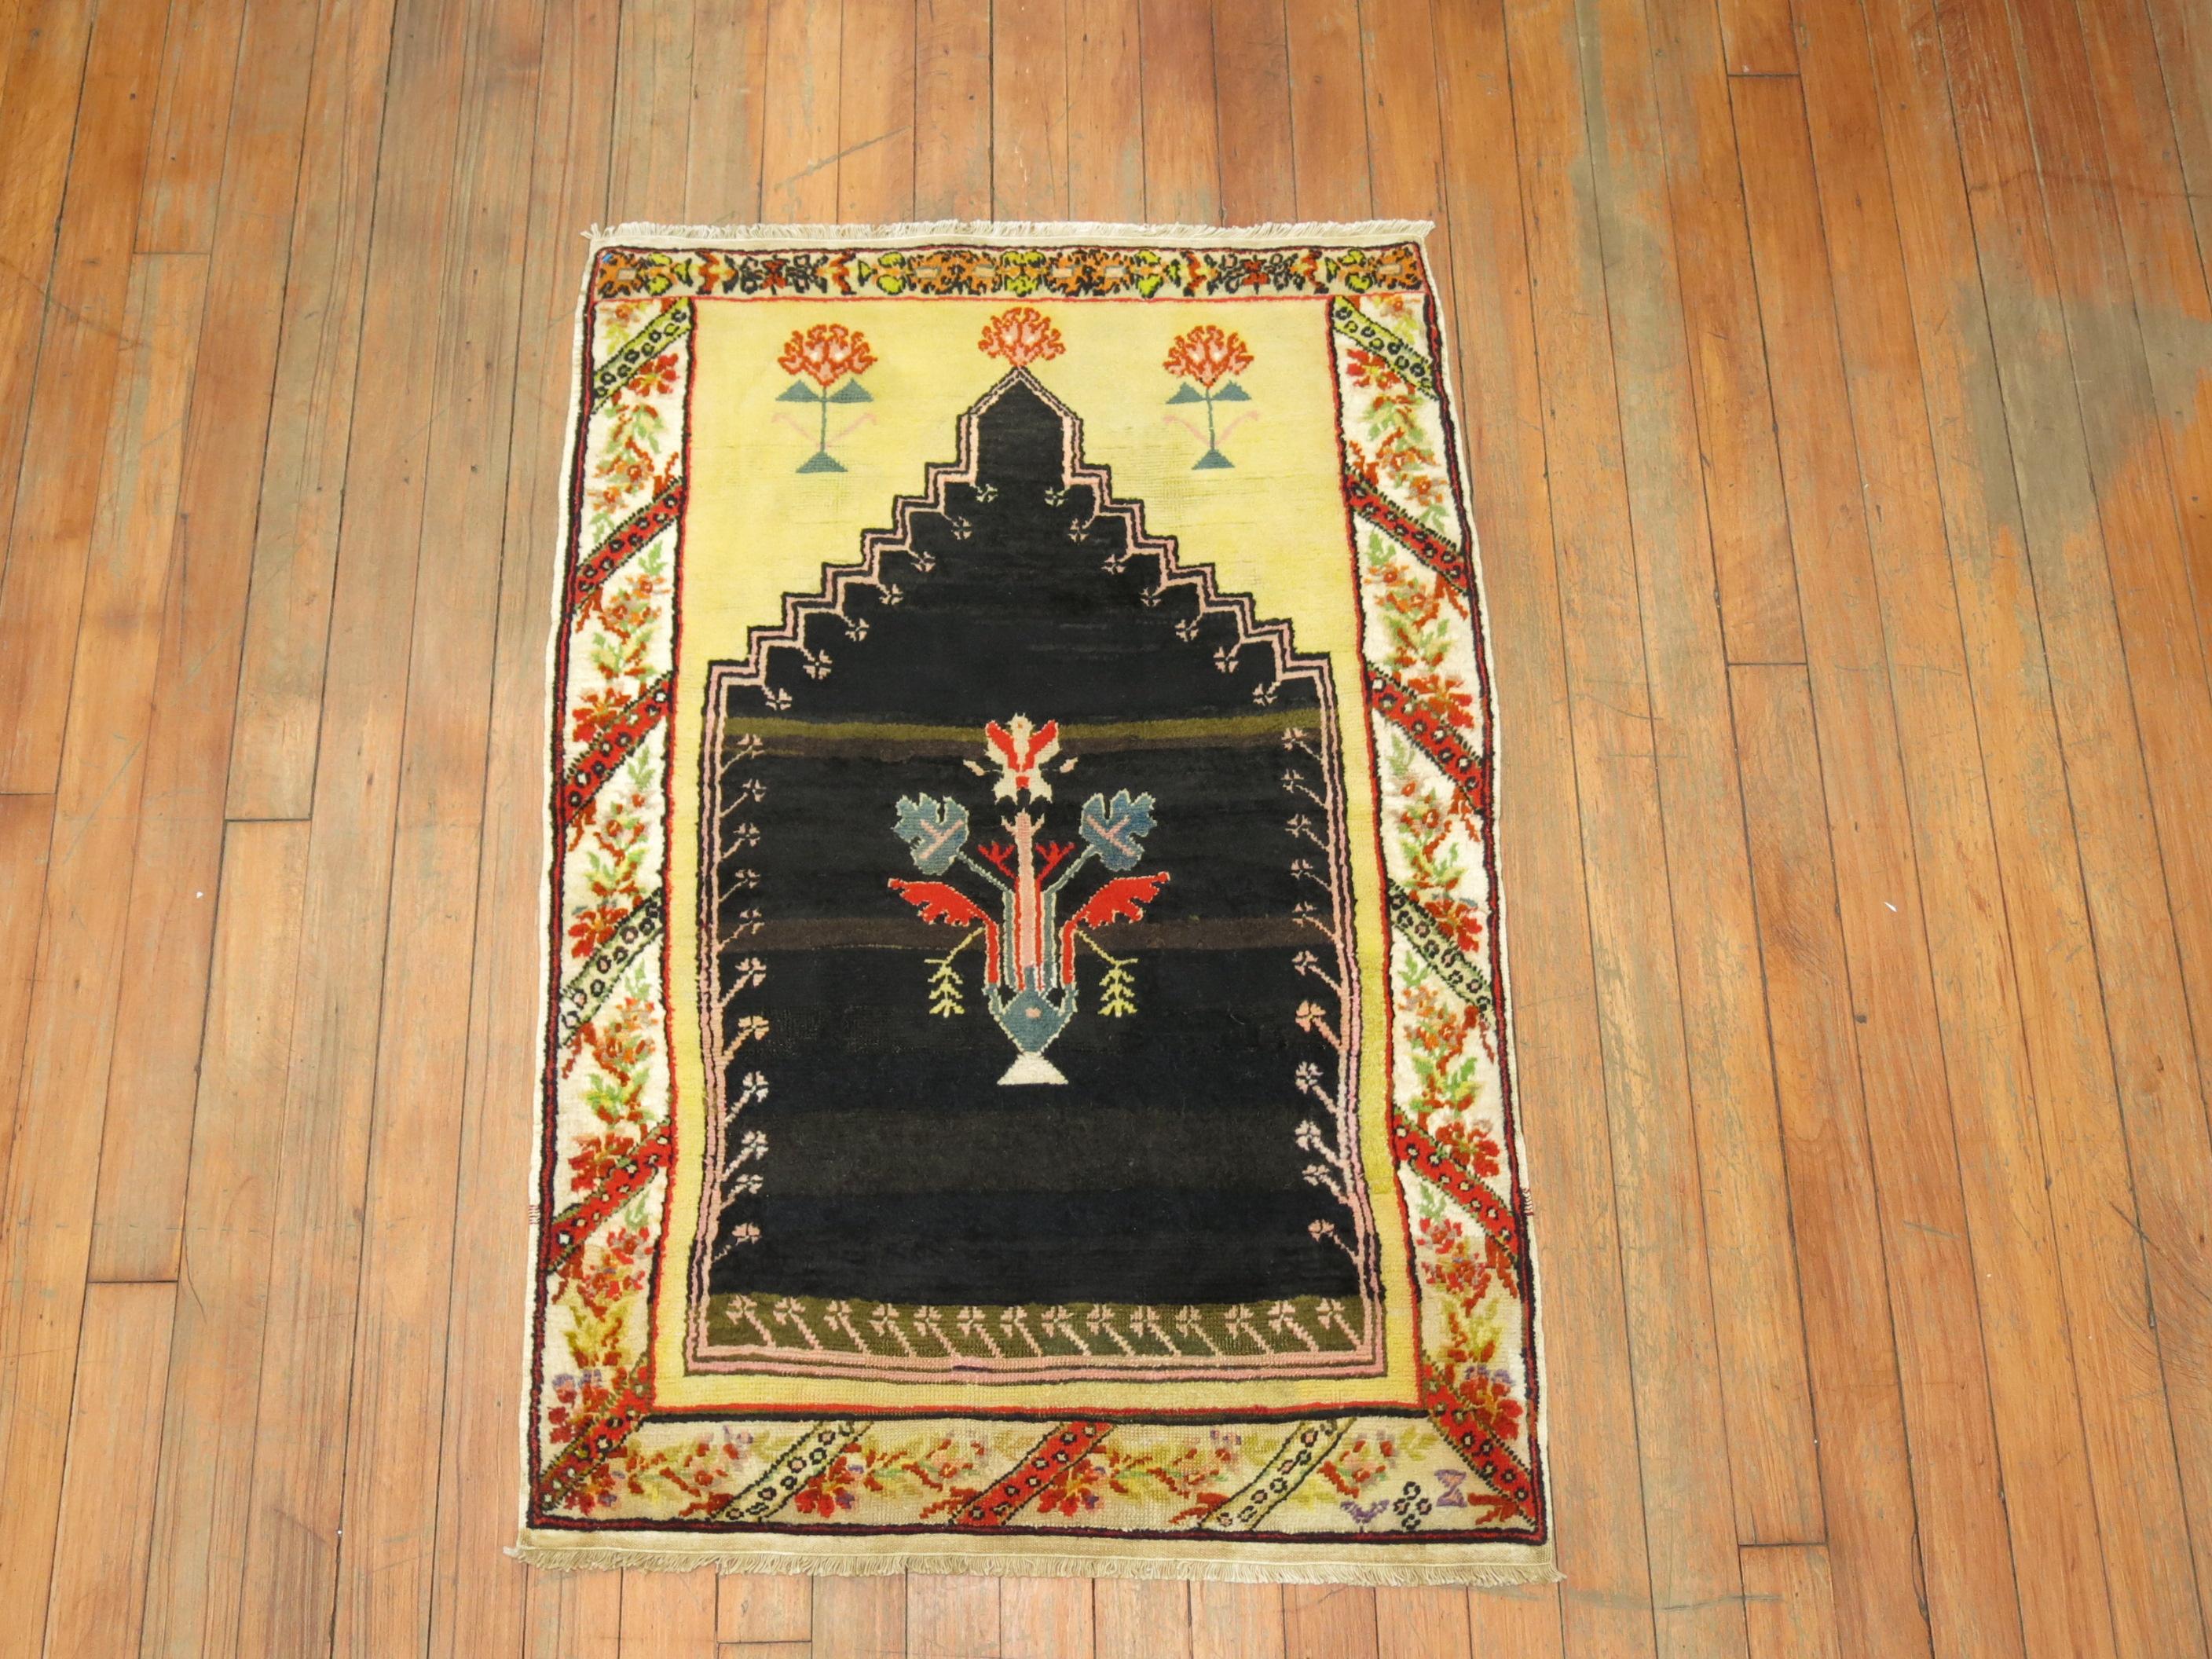 A one of a kind decorative Turkish rug with a prayer niche motif featuring on an unusual black color field.